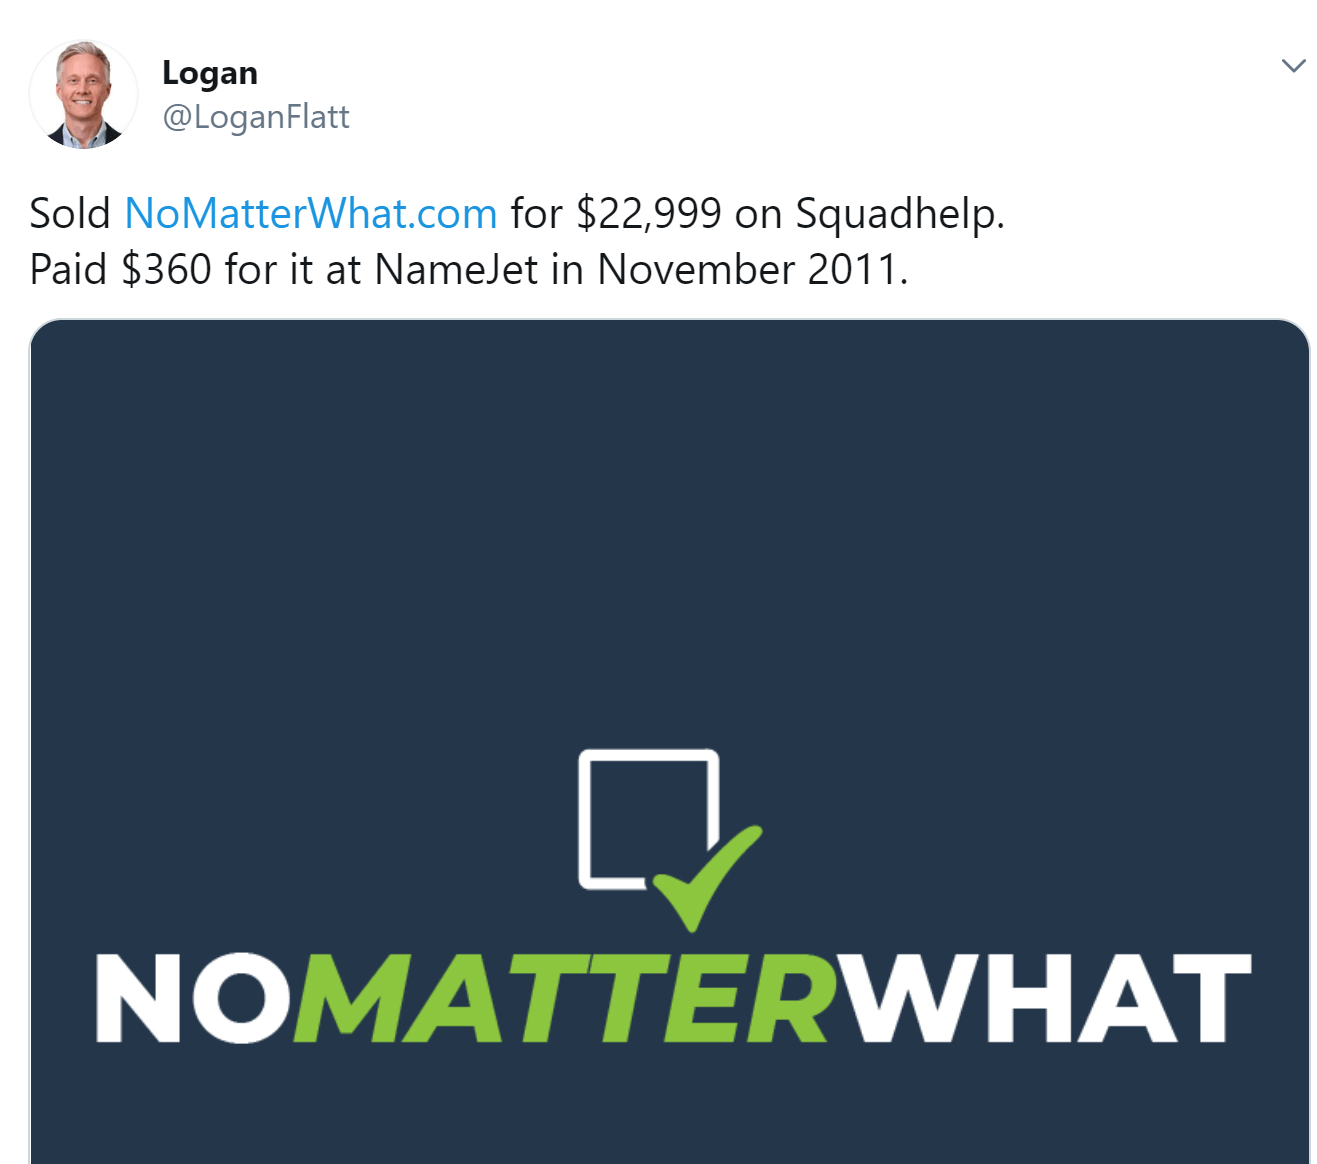 NoMatterWhat(.)com – from $360 purchase to $22,999 sale with Logan Flatt